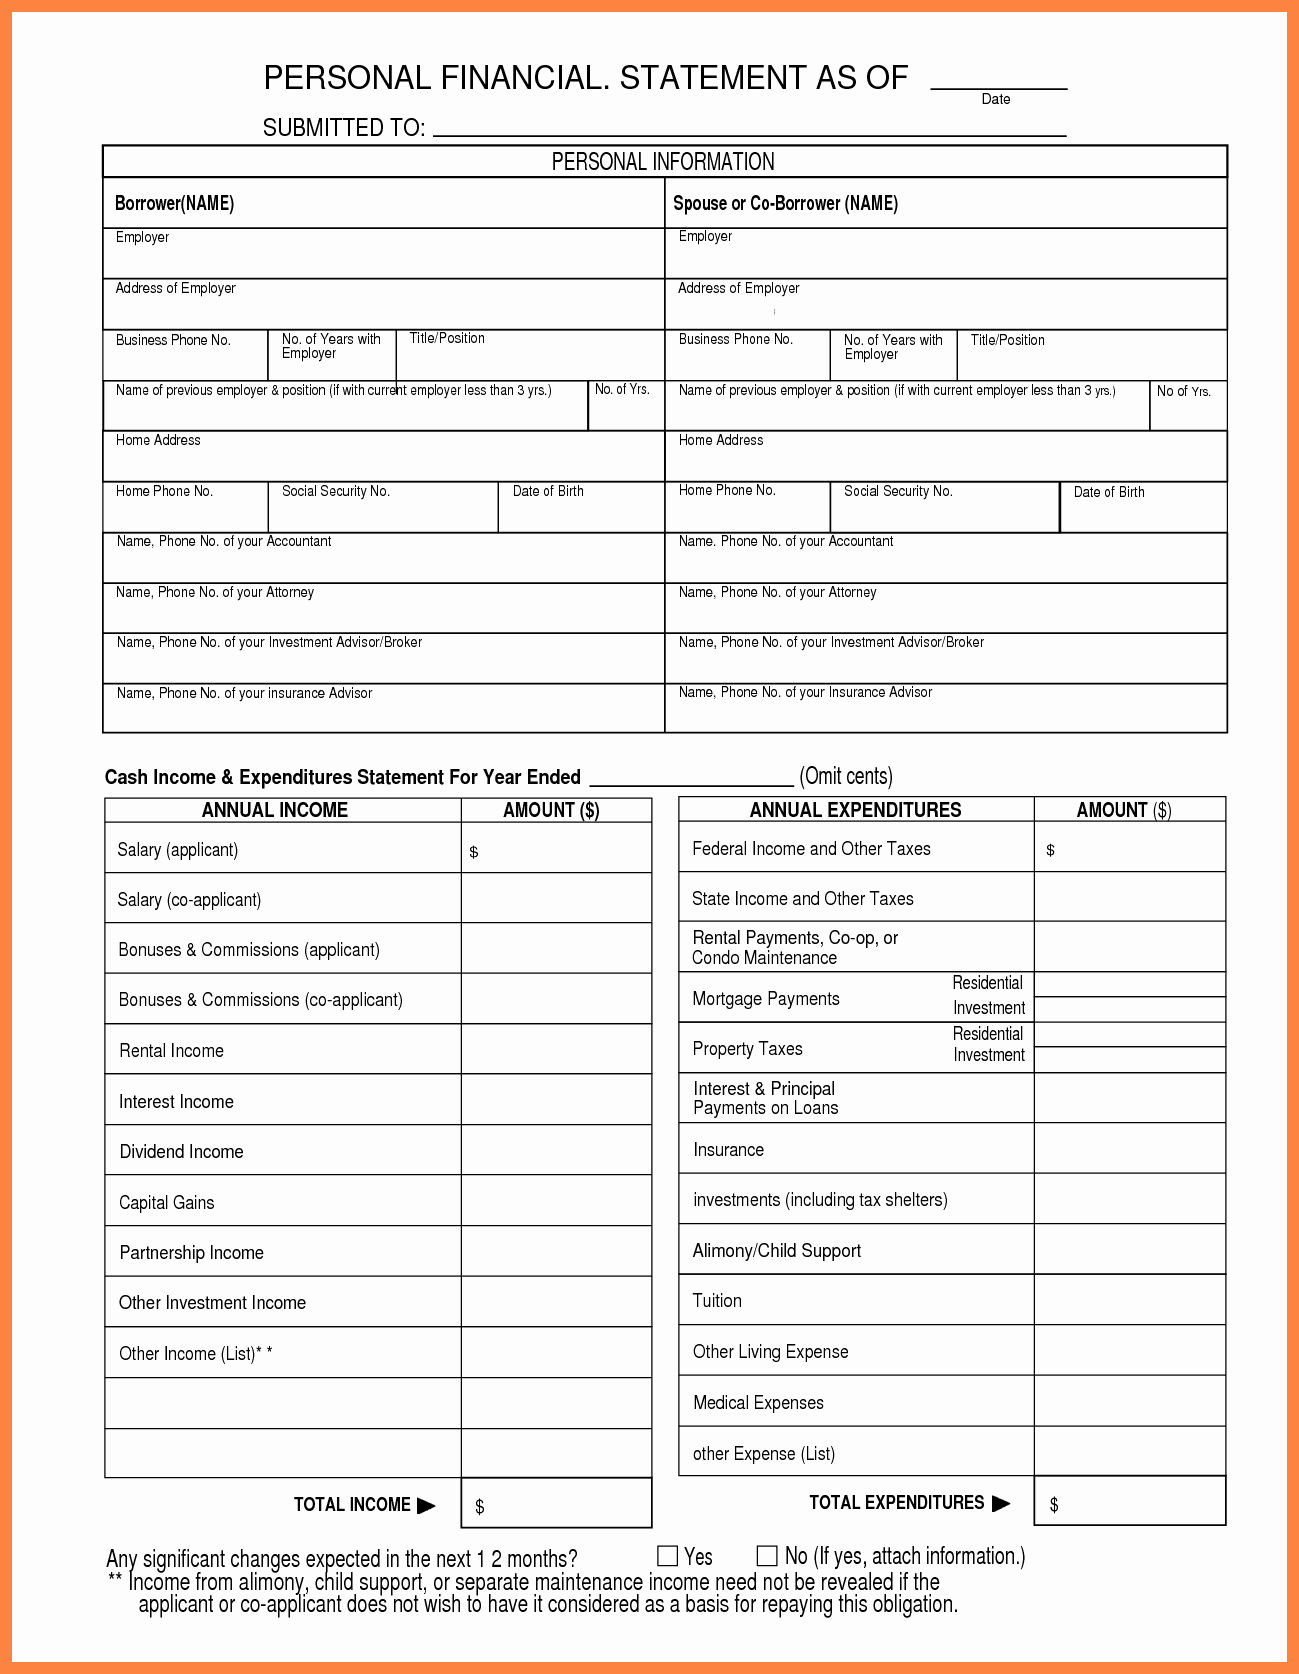 Free Financial Statement Template Lovely Personal Financial Statement Template Sarahepps